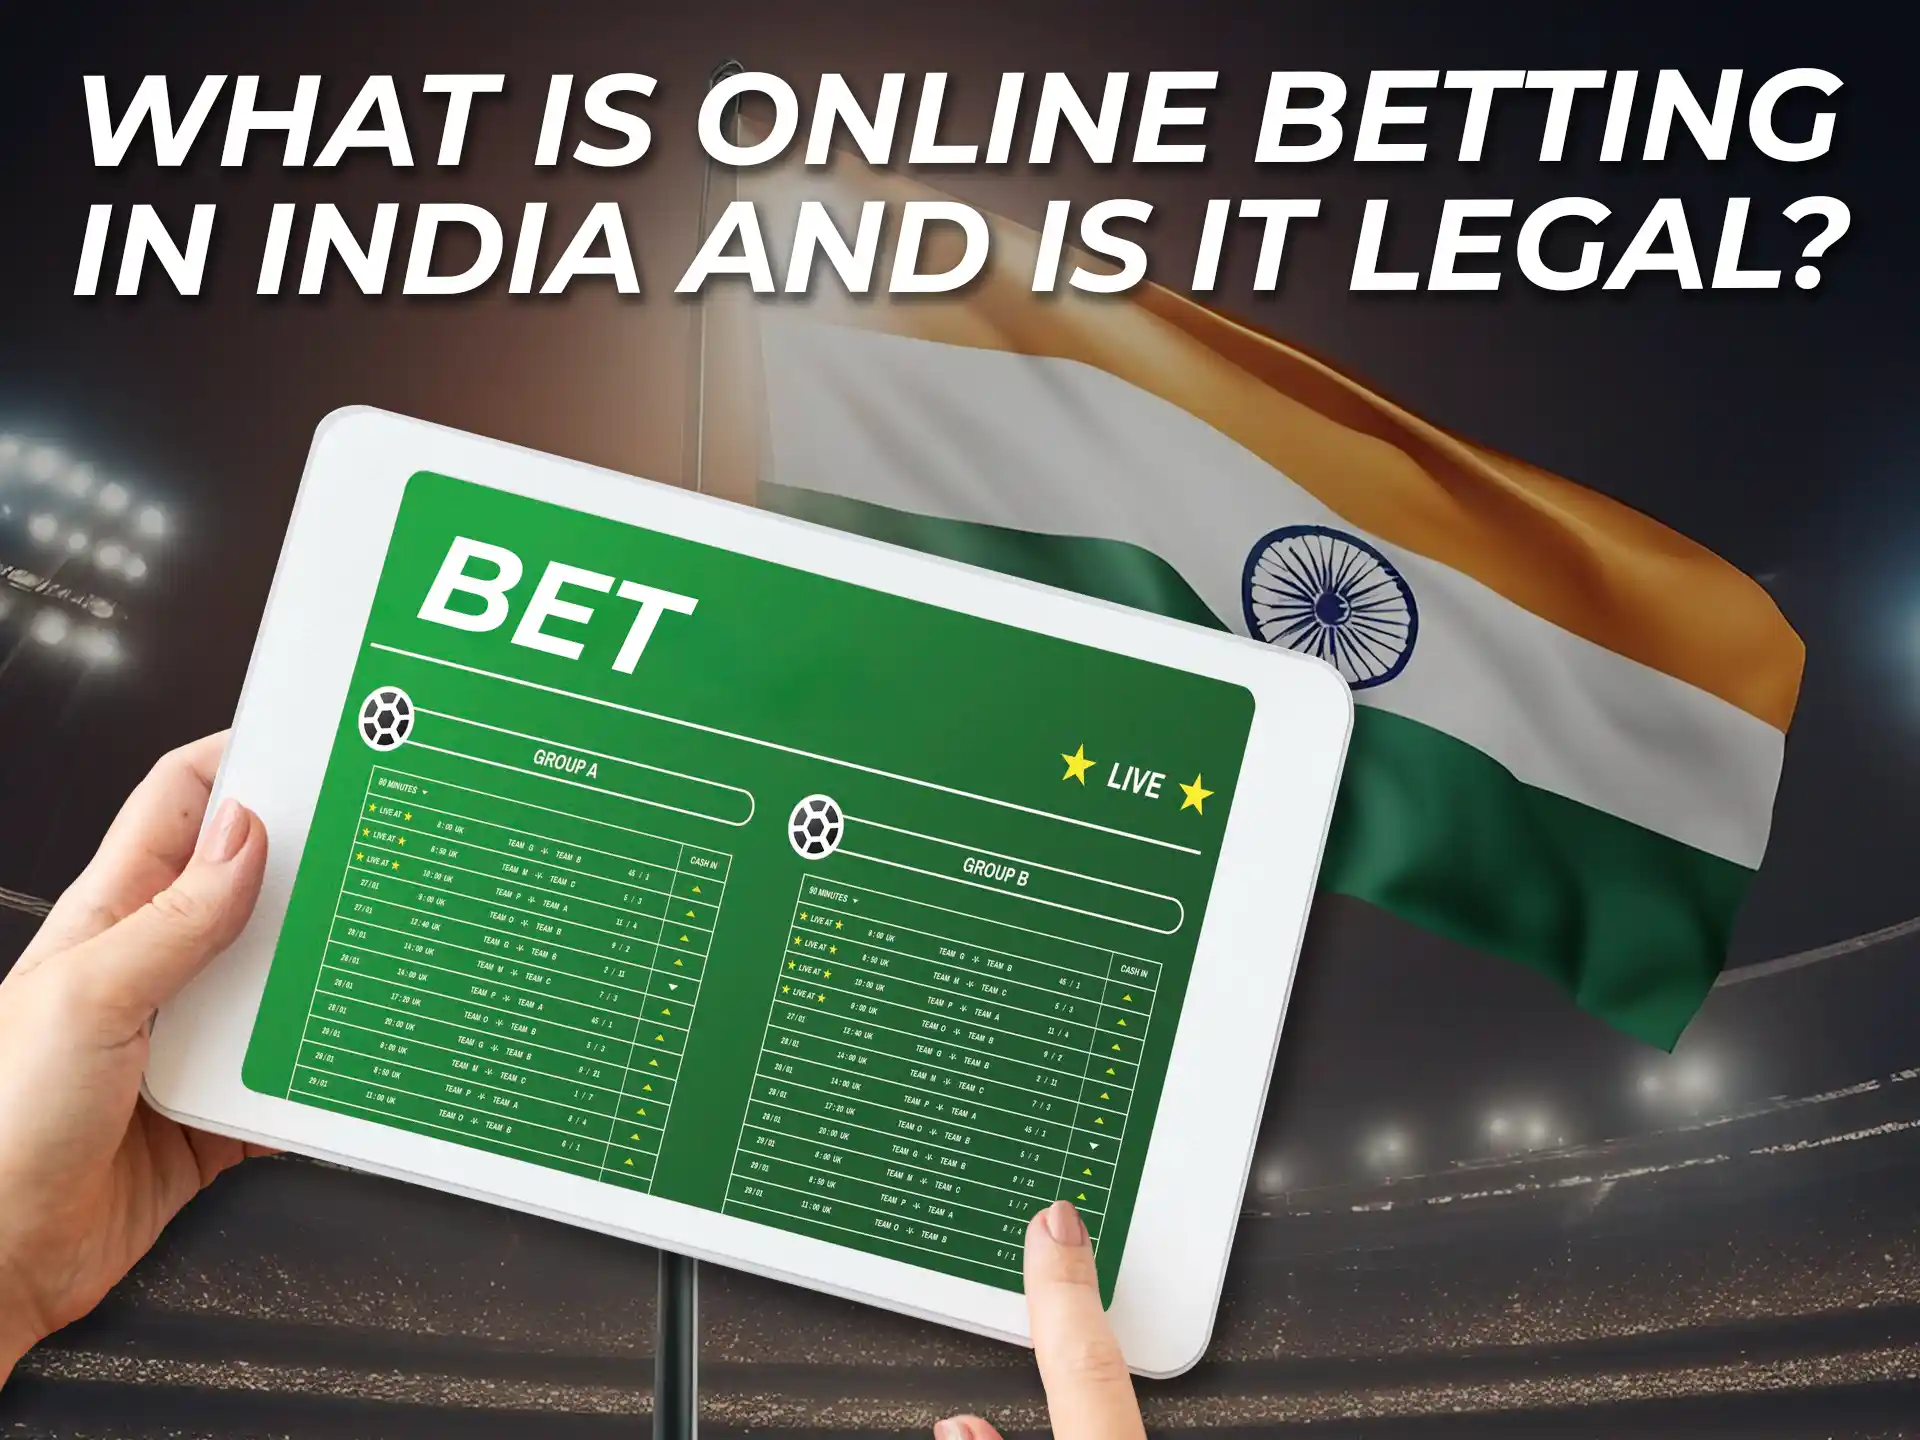 Sports betting is common in India and is very popular among players.